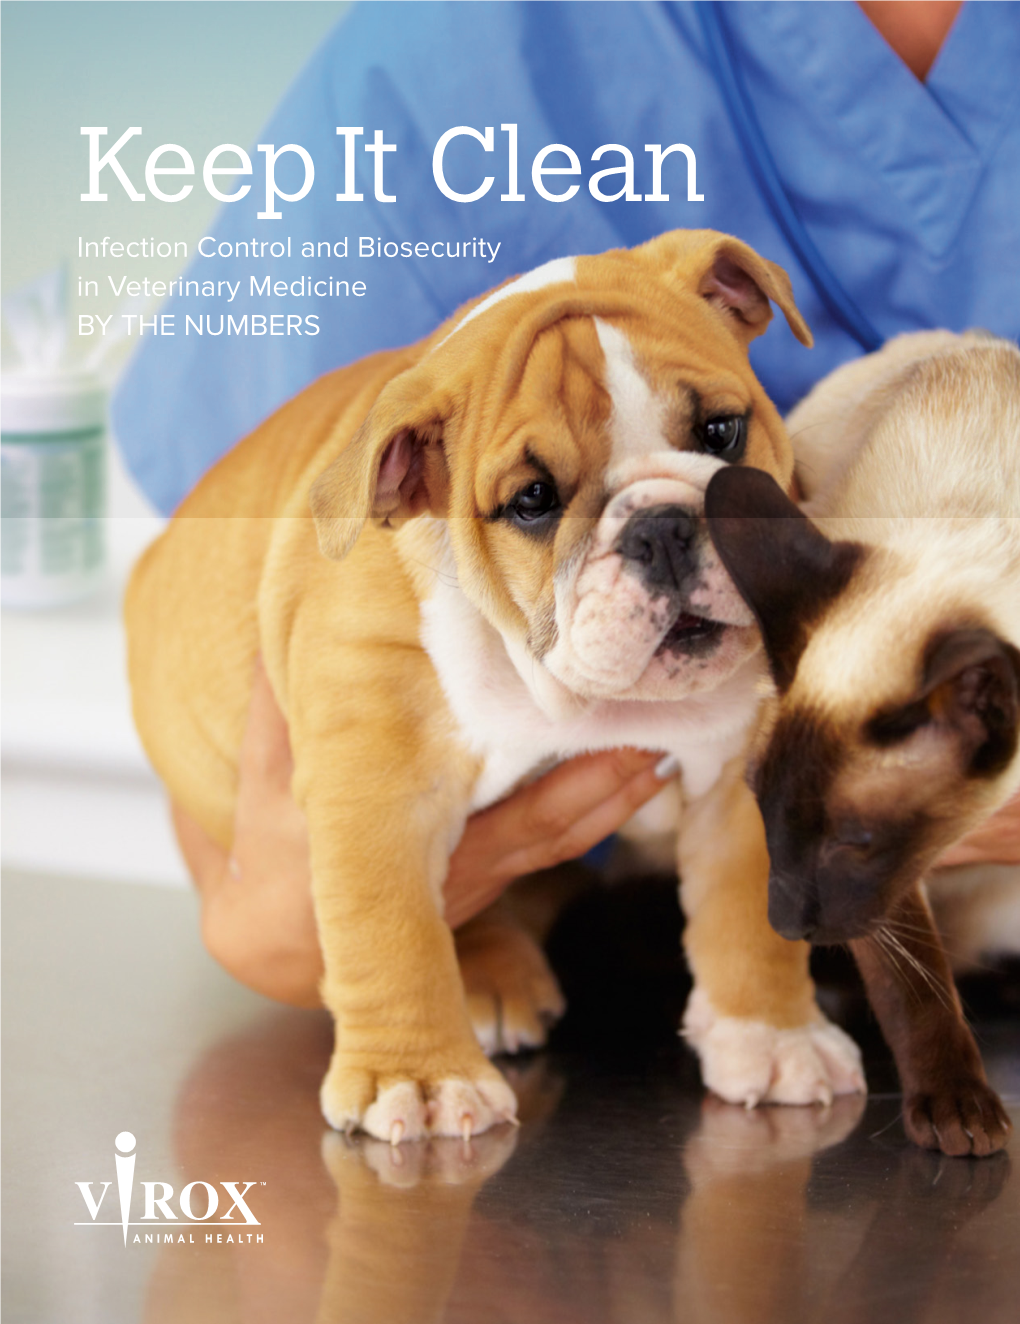 Keep It Clean: Infection Control and Biosecurity in Veterinary Medicine